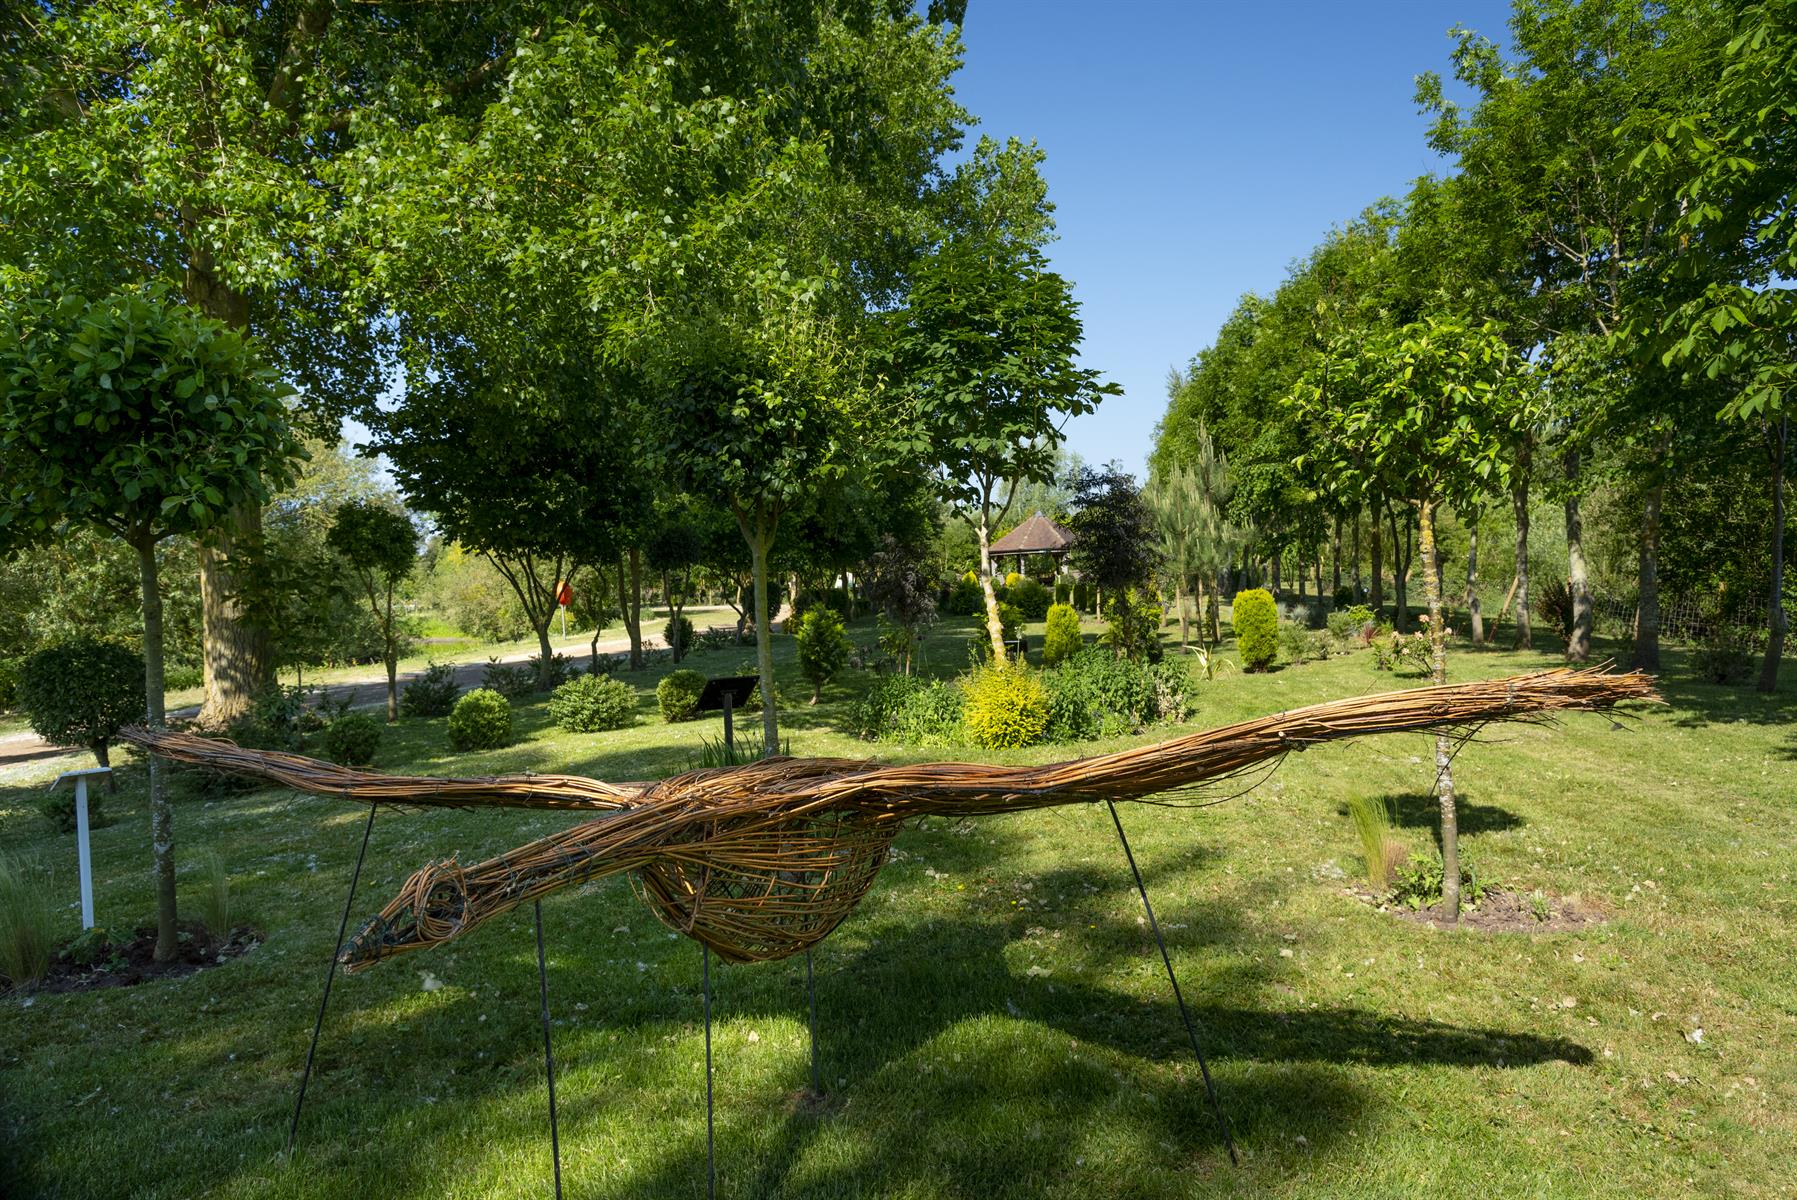 Goose Green Willow Sculpture in the Allied Special Forces Memorial Grove